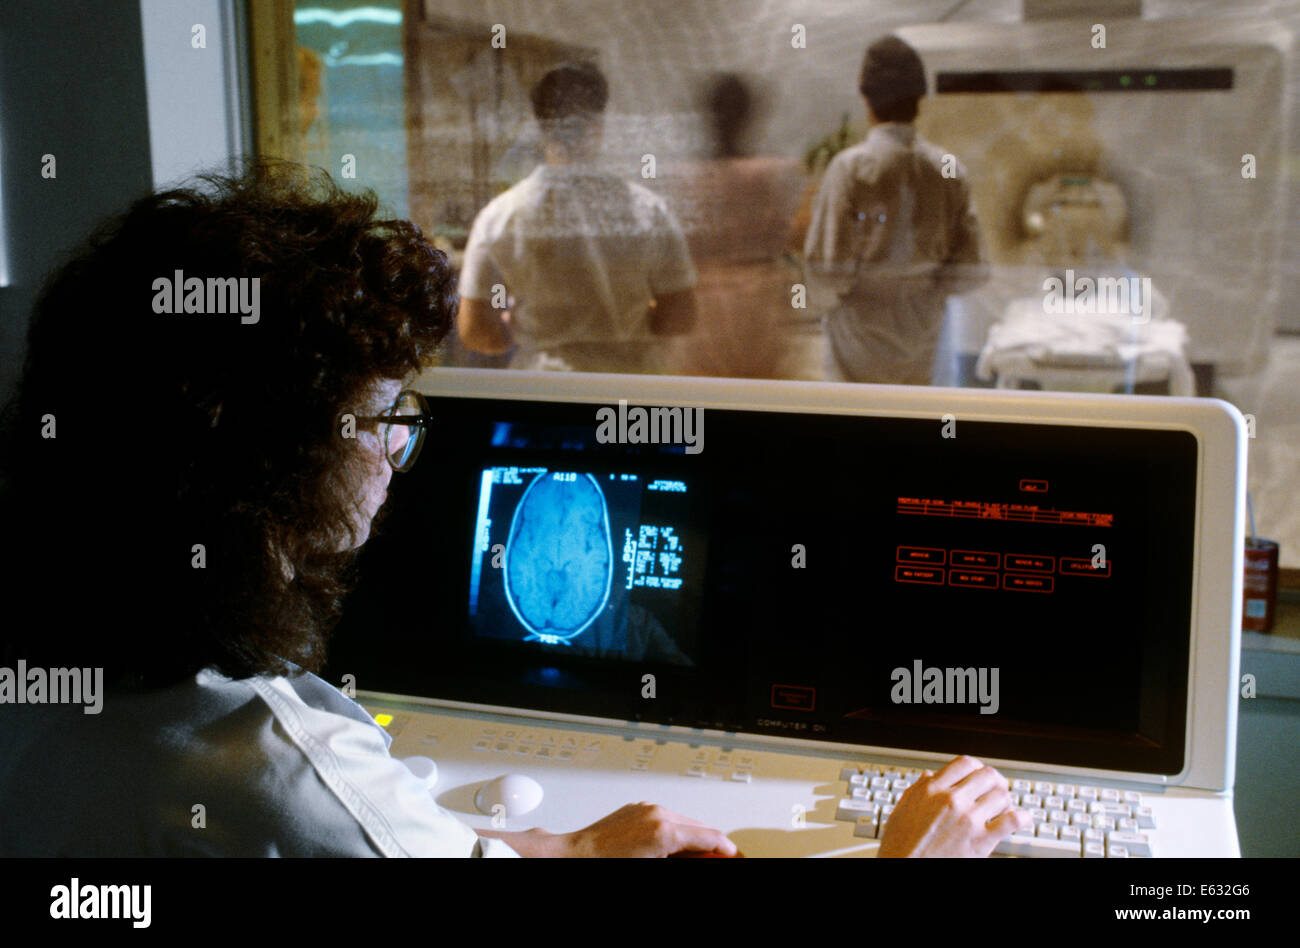 1980s FEMALE MEDICAL TECHNICIAN MONITORING CONSOLE FOR NUCLEAR MAGNETIC RESONANCE SCANNER Stock Photo